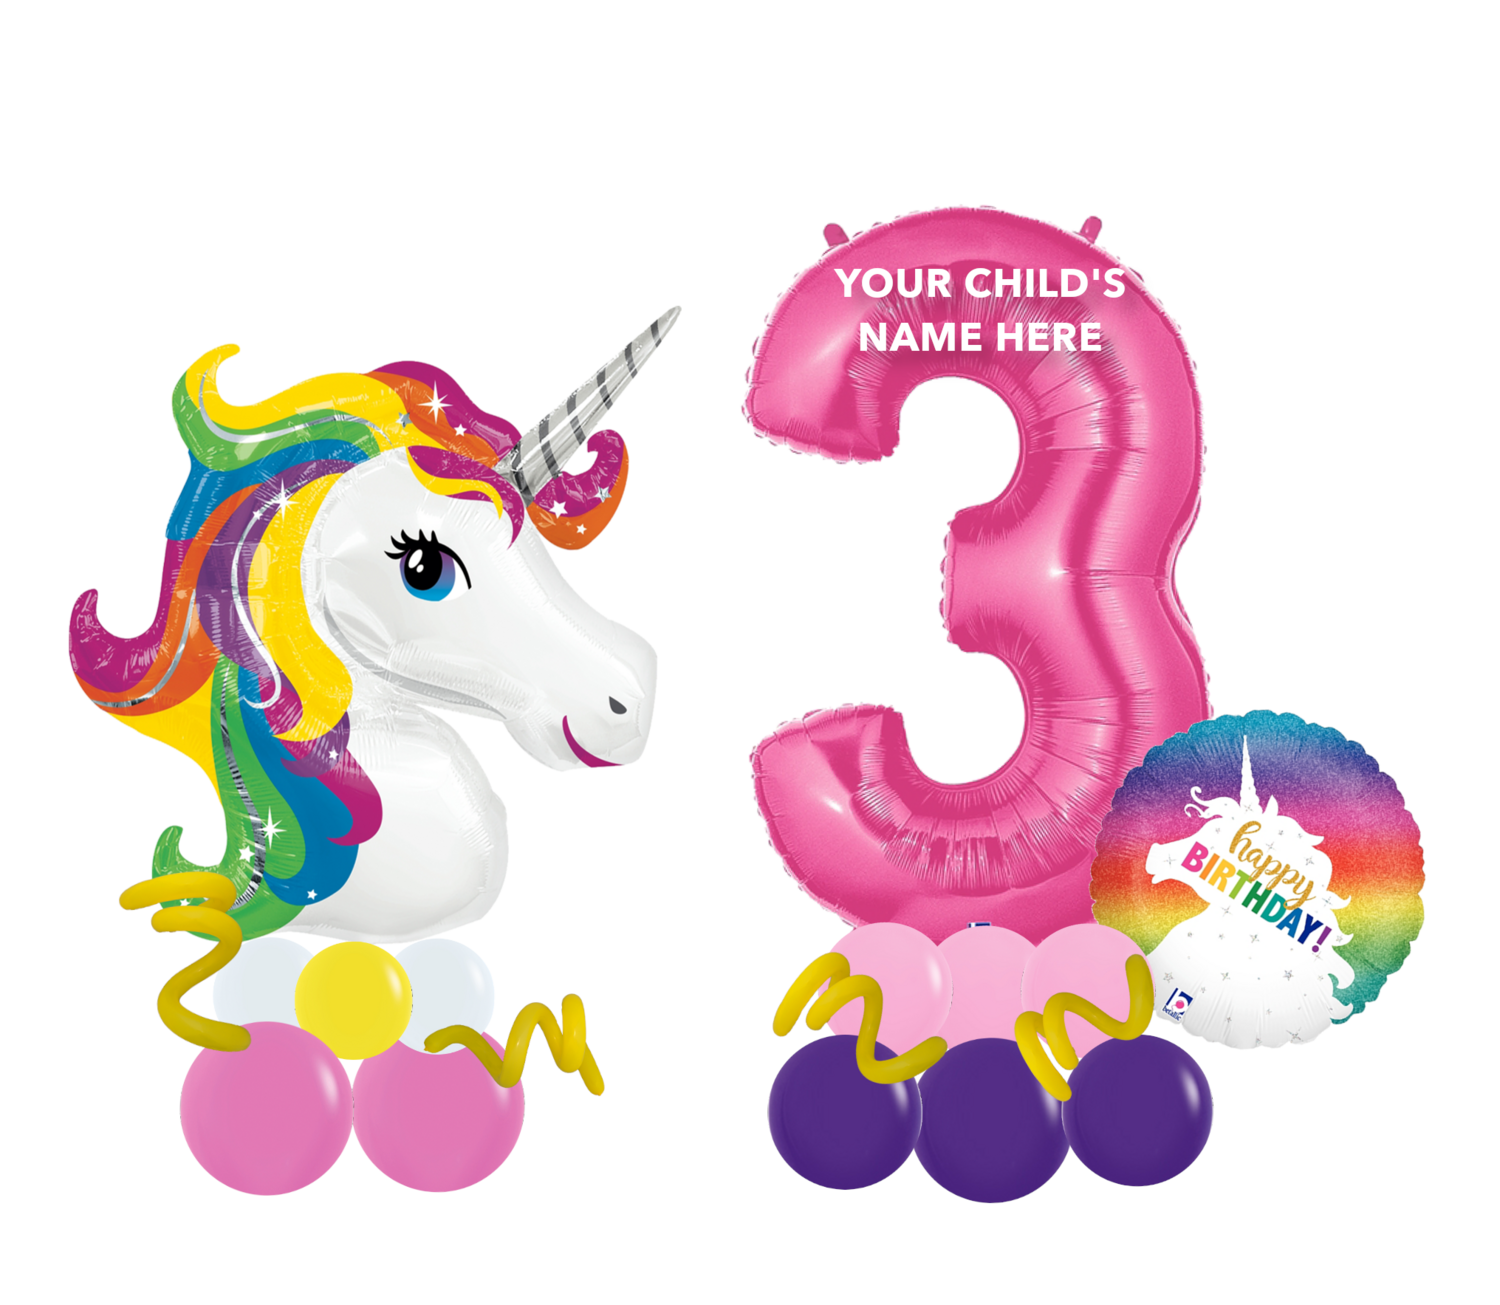 Unicorn balloon milestone number package, long lasting air filled